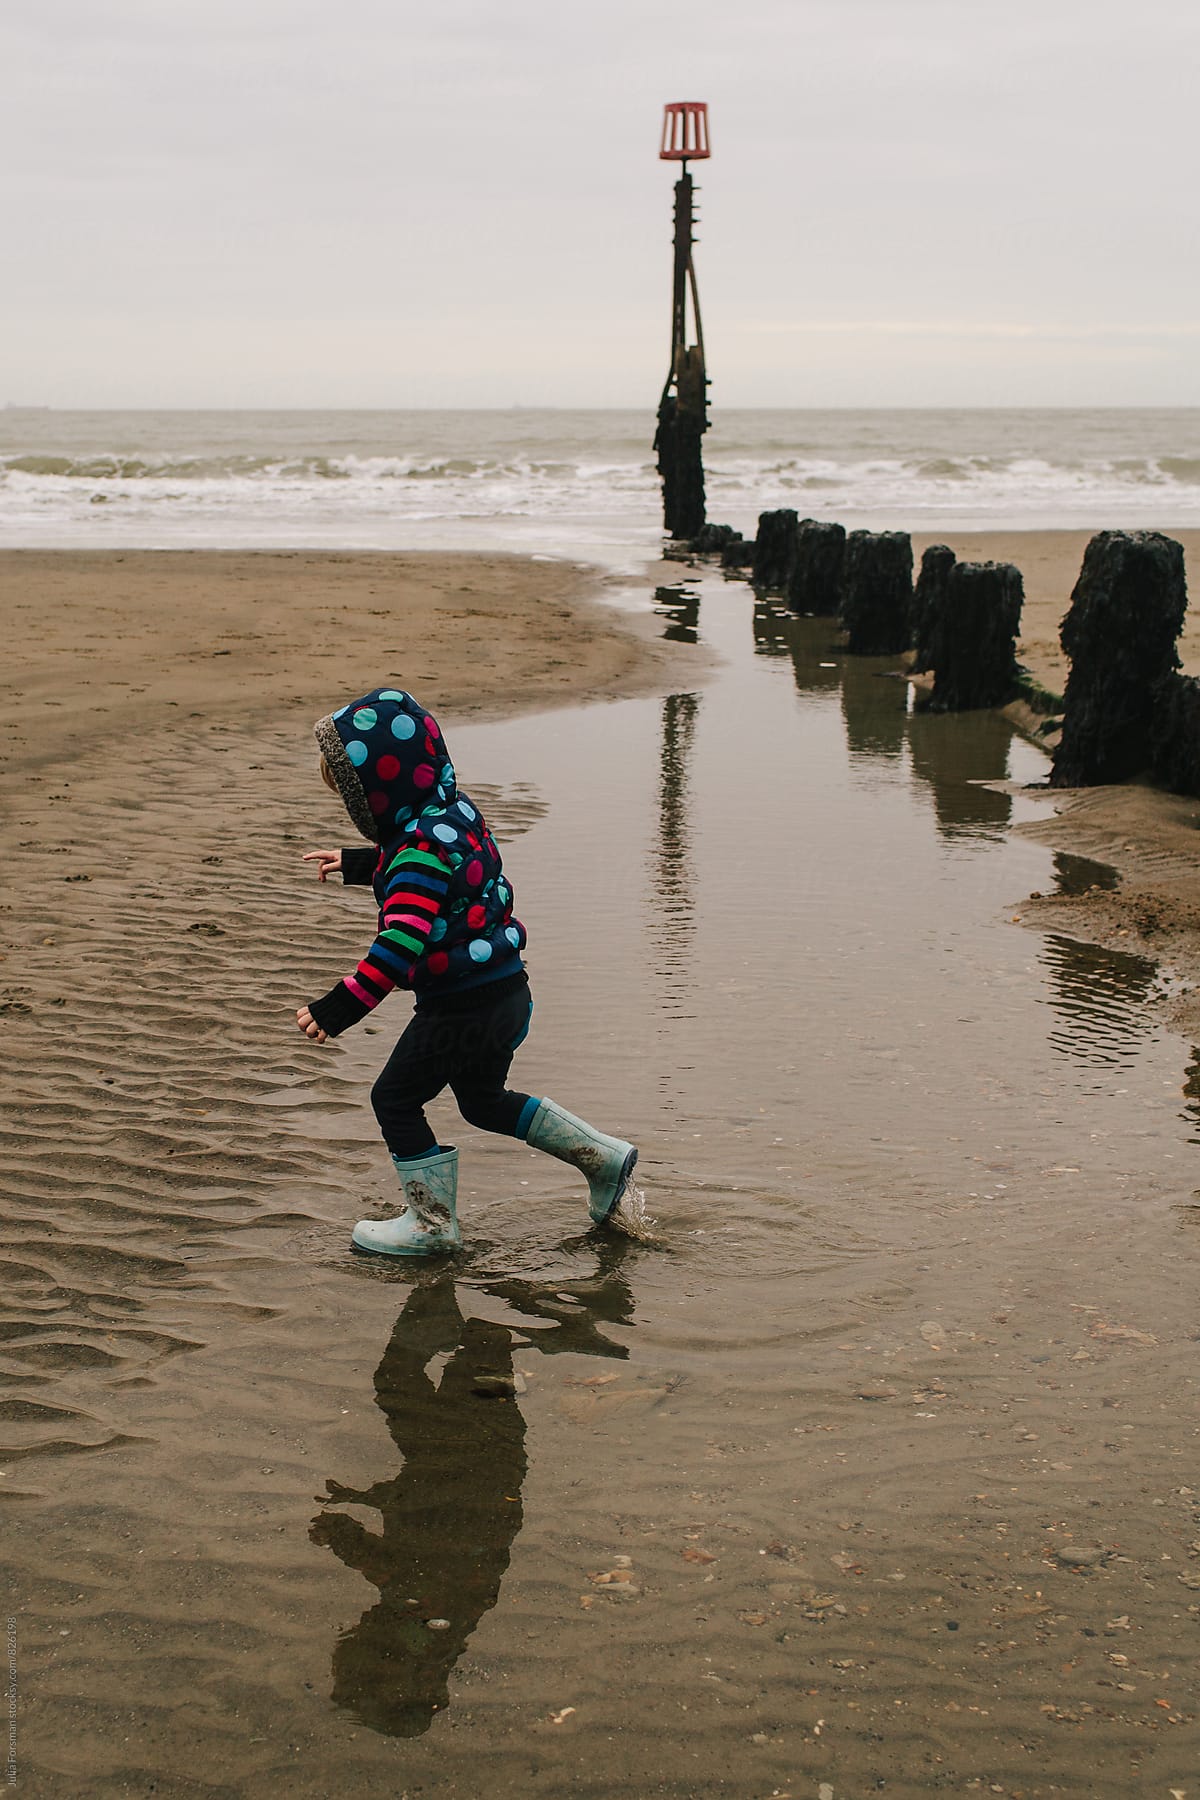 Small child and her reflection running through water next to a sea barrier on a wintry beach.